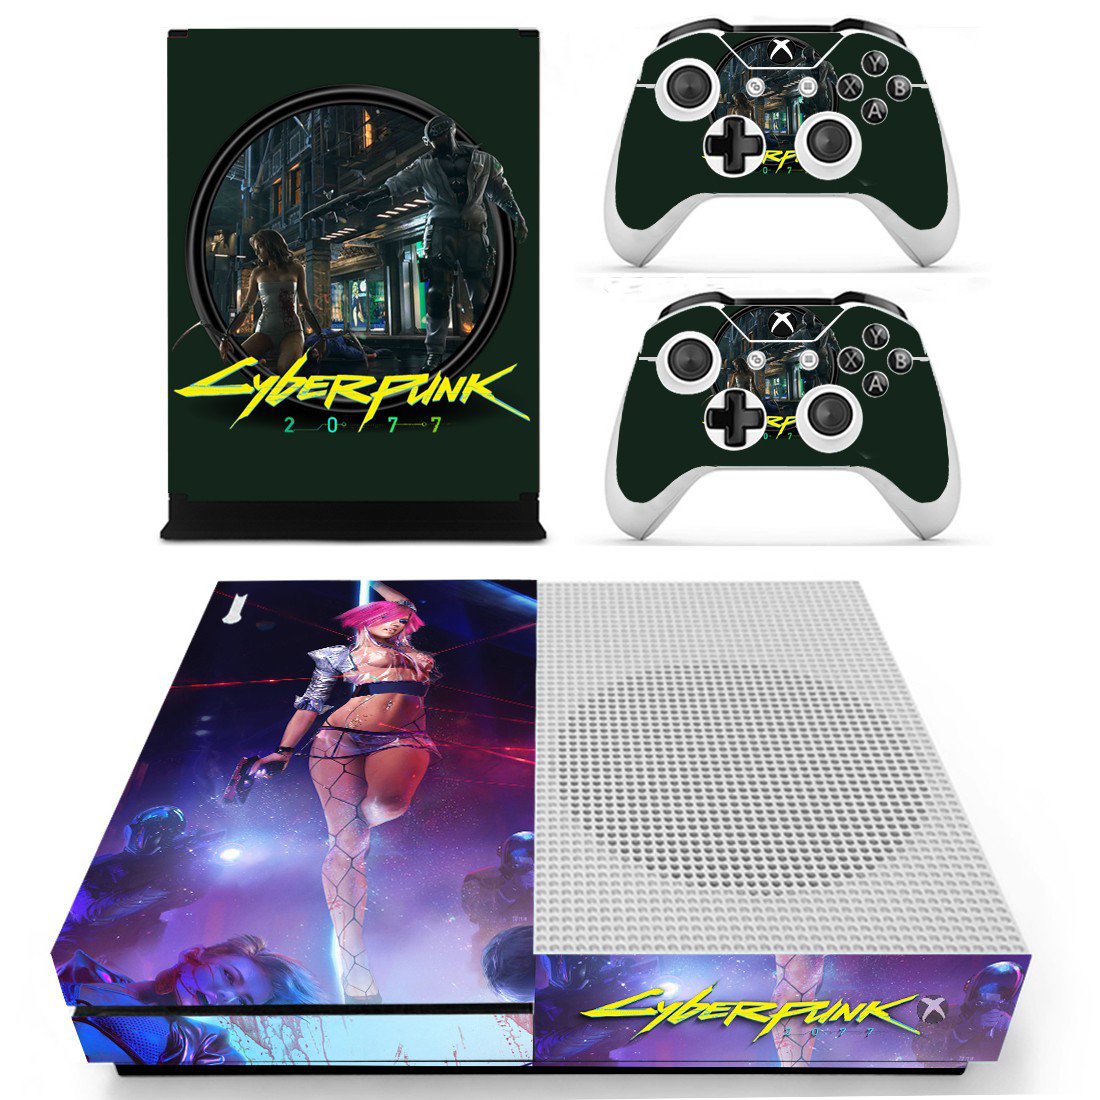 Cyberpunk 2077 Cover For Xbox One S